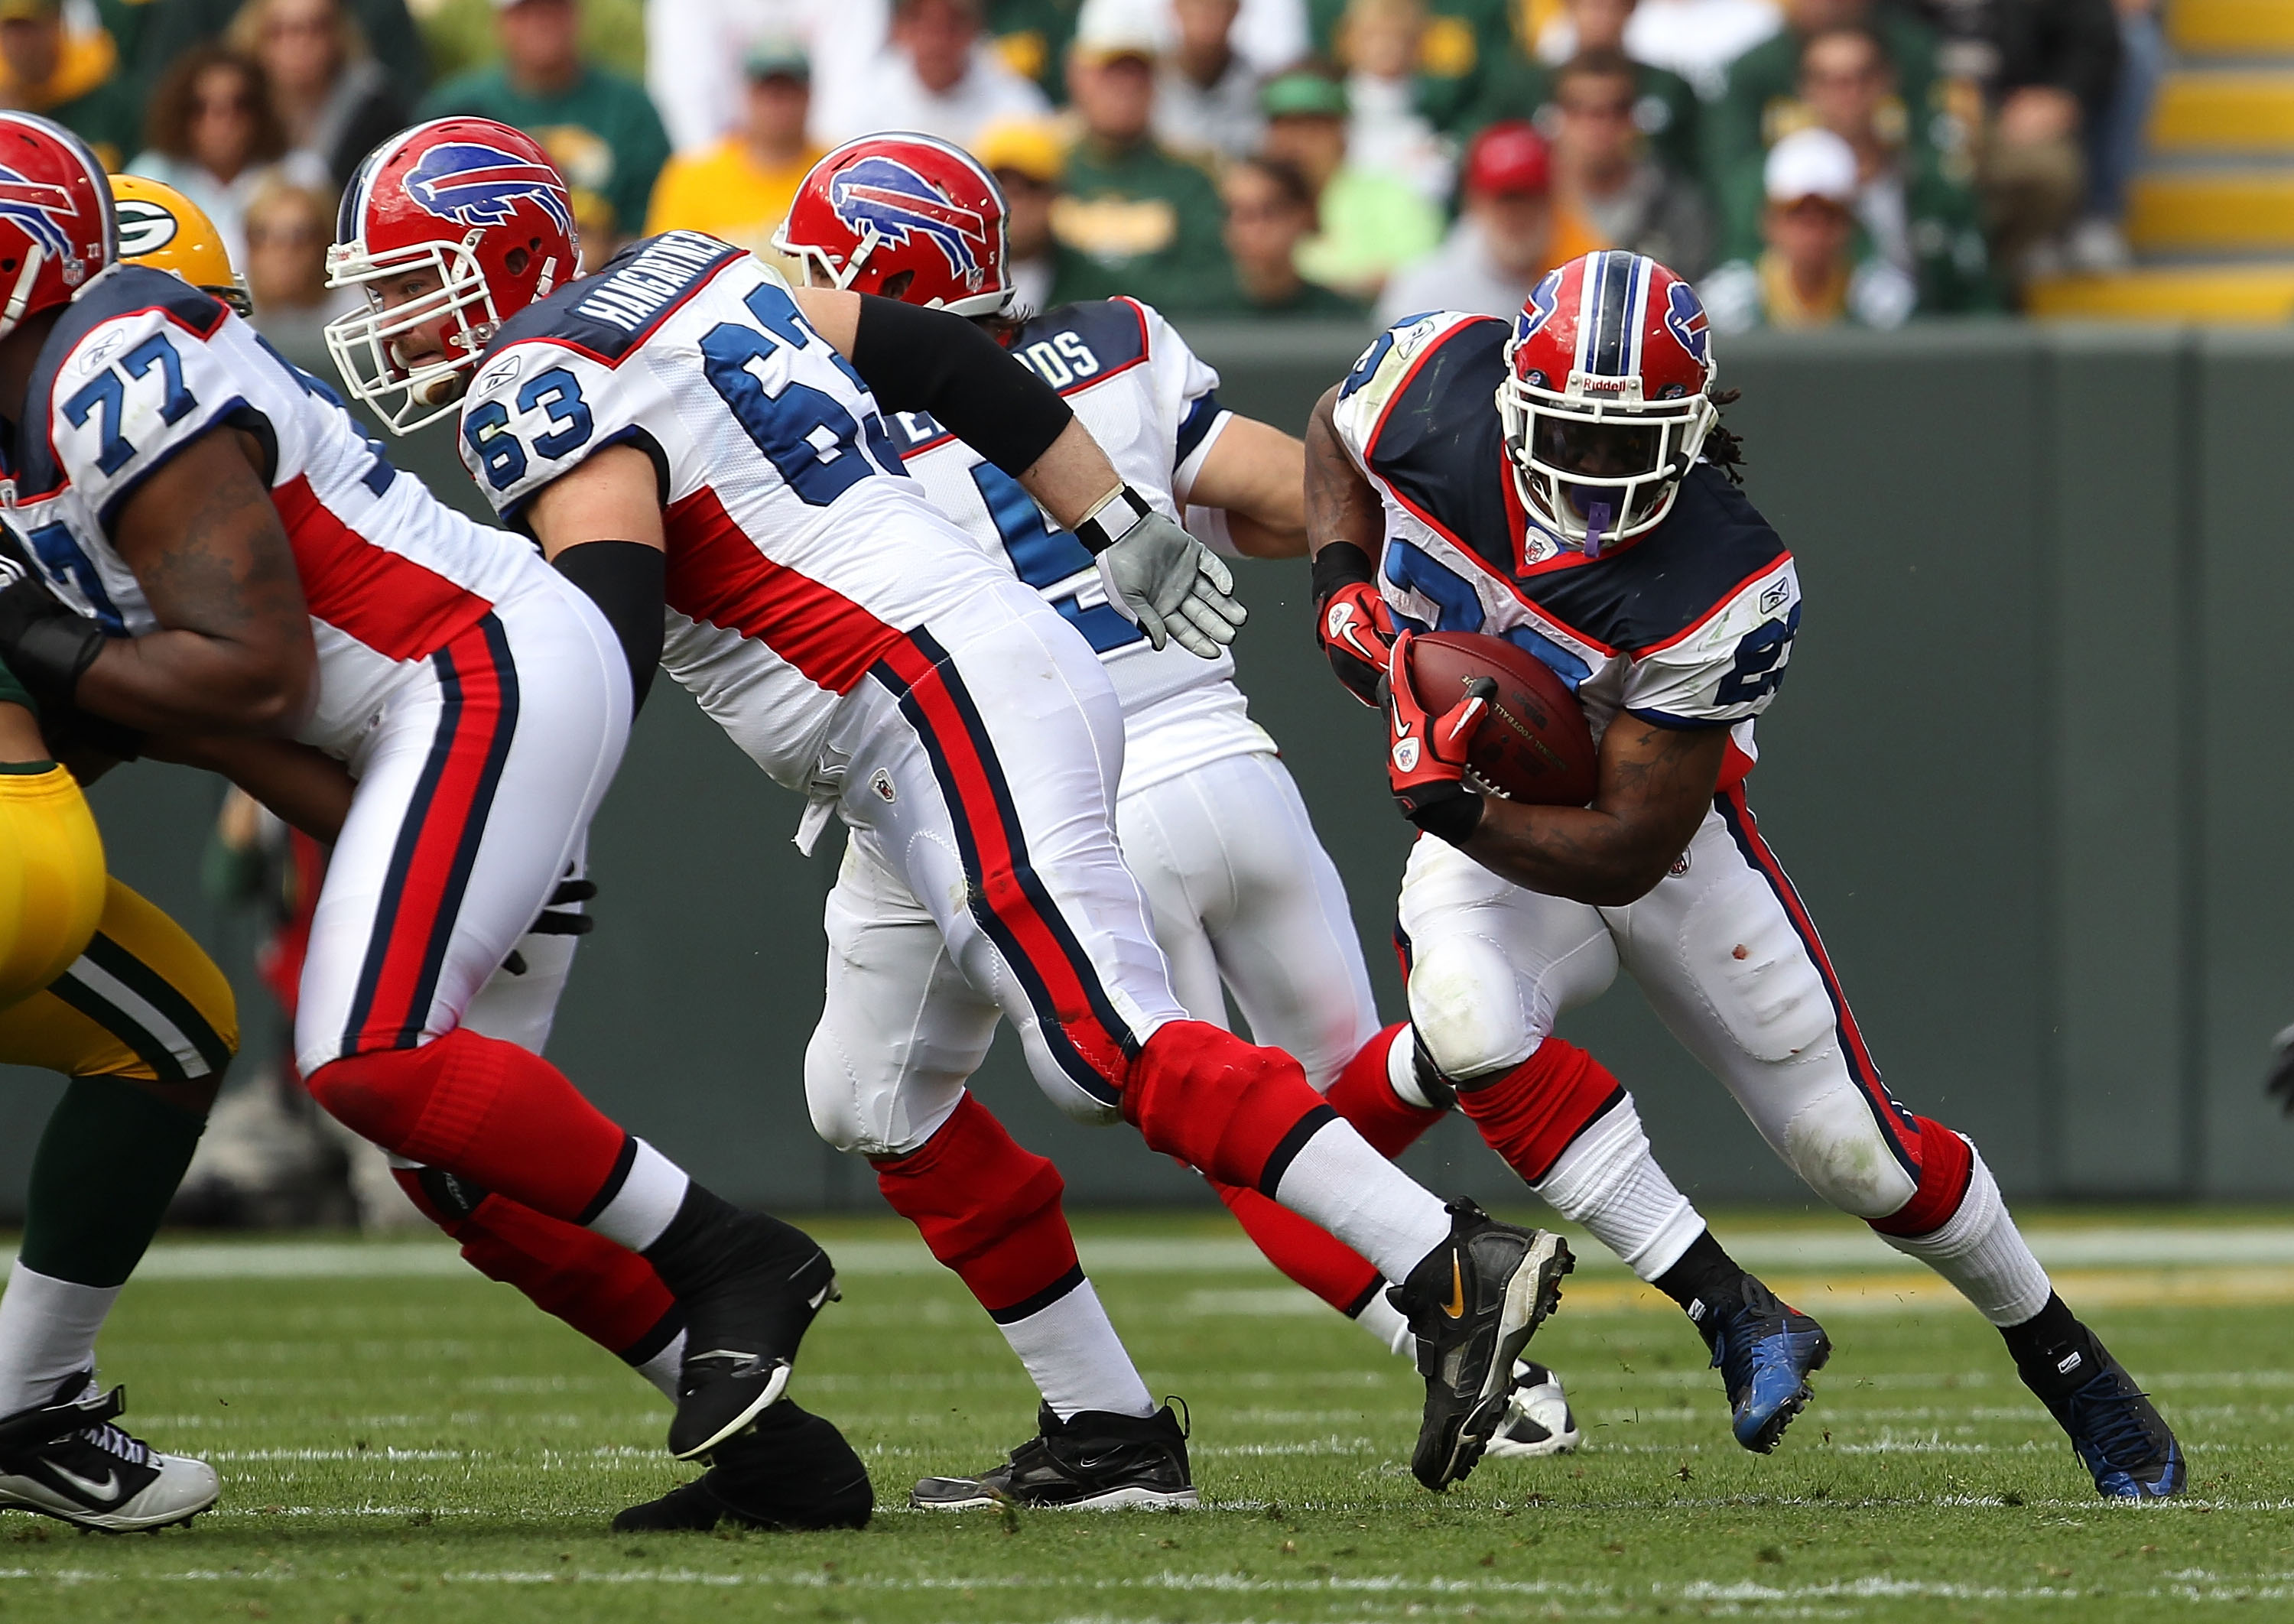 GREEN BAY, WI - SEPTEMBER 19: Marshawn Lynch #23 of the Buffalo Bills runs as teammates Demetrius Bell #77 and Geoff Hangartner #63 block against the Green Bay Packers at Lambeau Field on September 19, 2010 in Green Bay, Wisconsin. The Packers defeated th